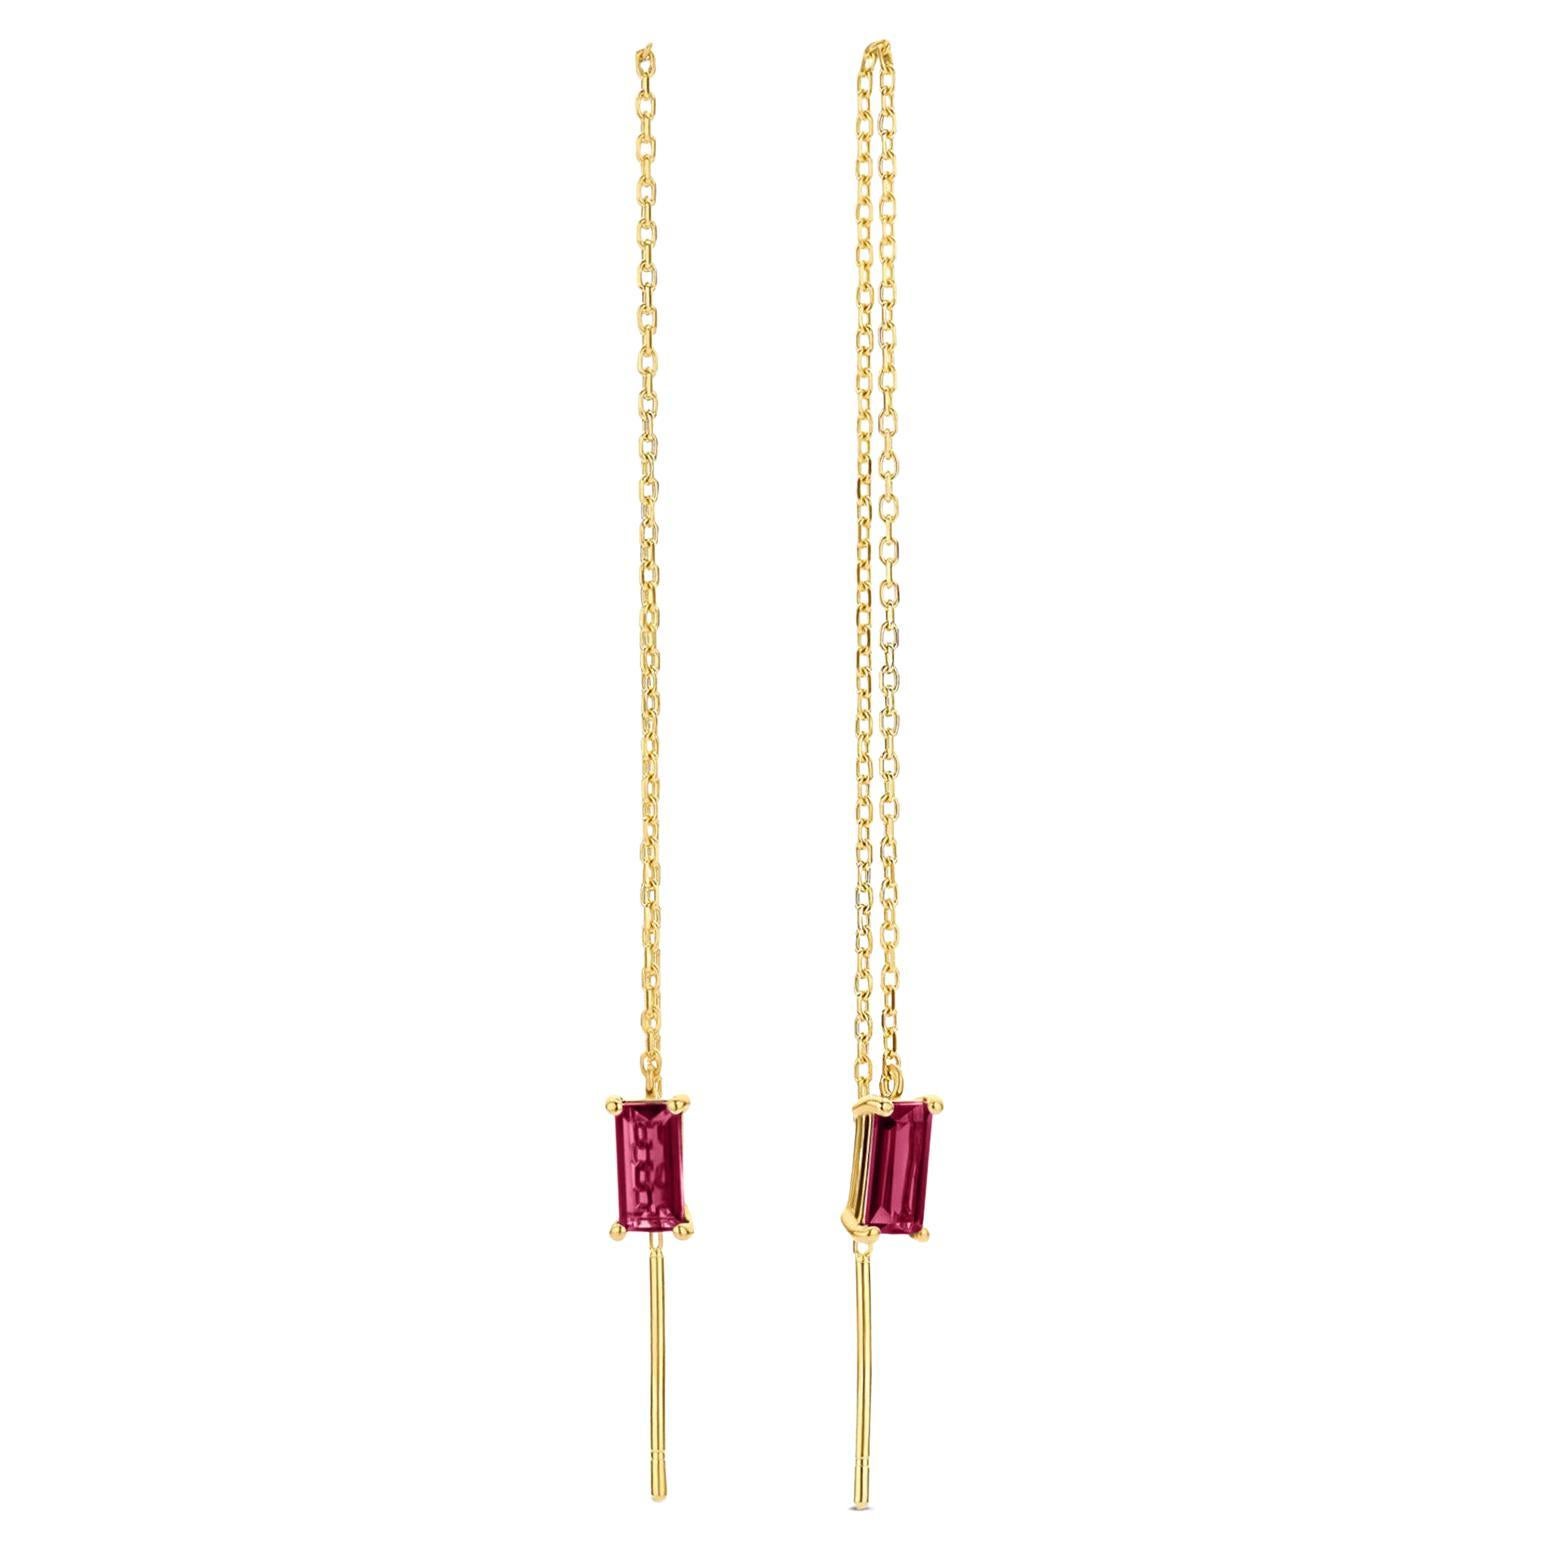 Chain 14k Gold Earrings with natural rubies !